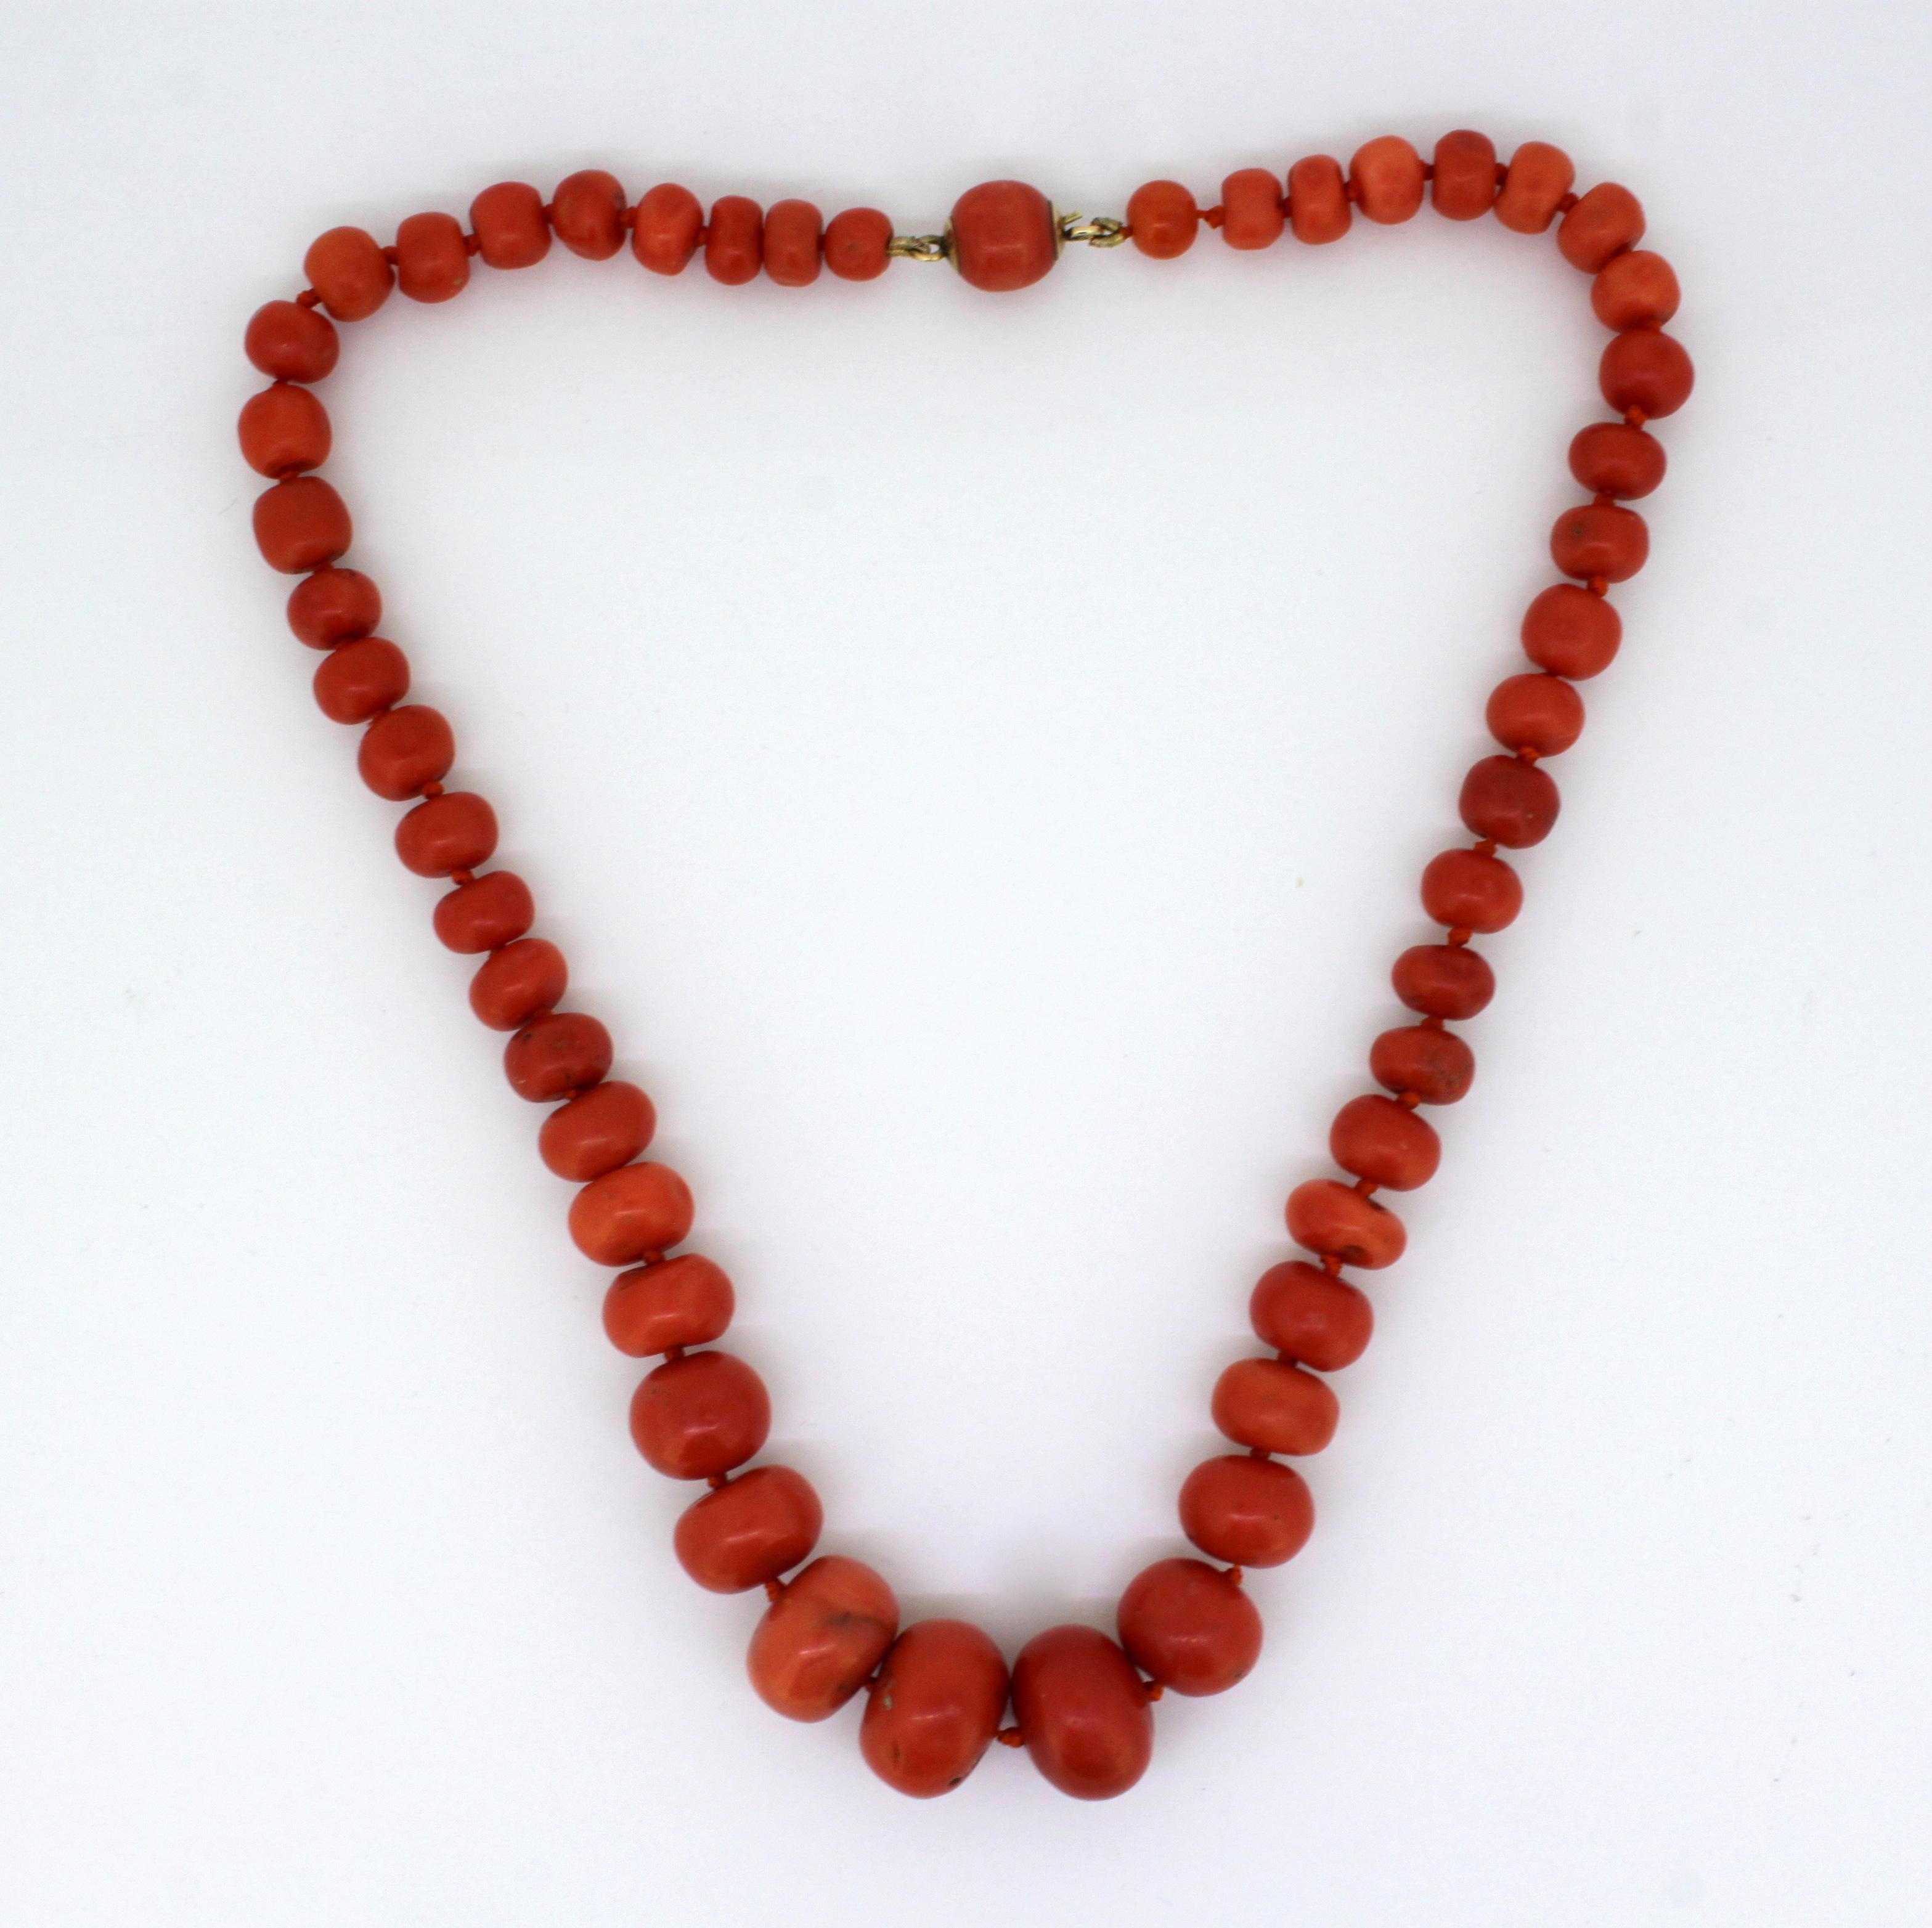 Antique French coral necklace.
Made in France Circa 1900

Please note : Due to shipping restrictions, for sale in EU only.

Approx Dimensions - 
Length x Width : 40.5 x 1.5 cm
Weight : 54 grams

Condition: Pre-owned, minor wear and tear and some